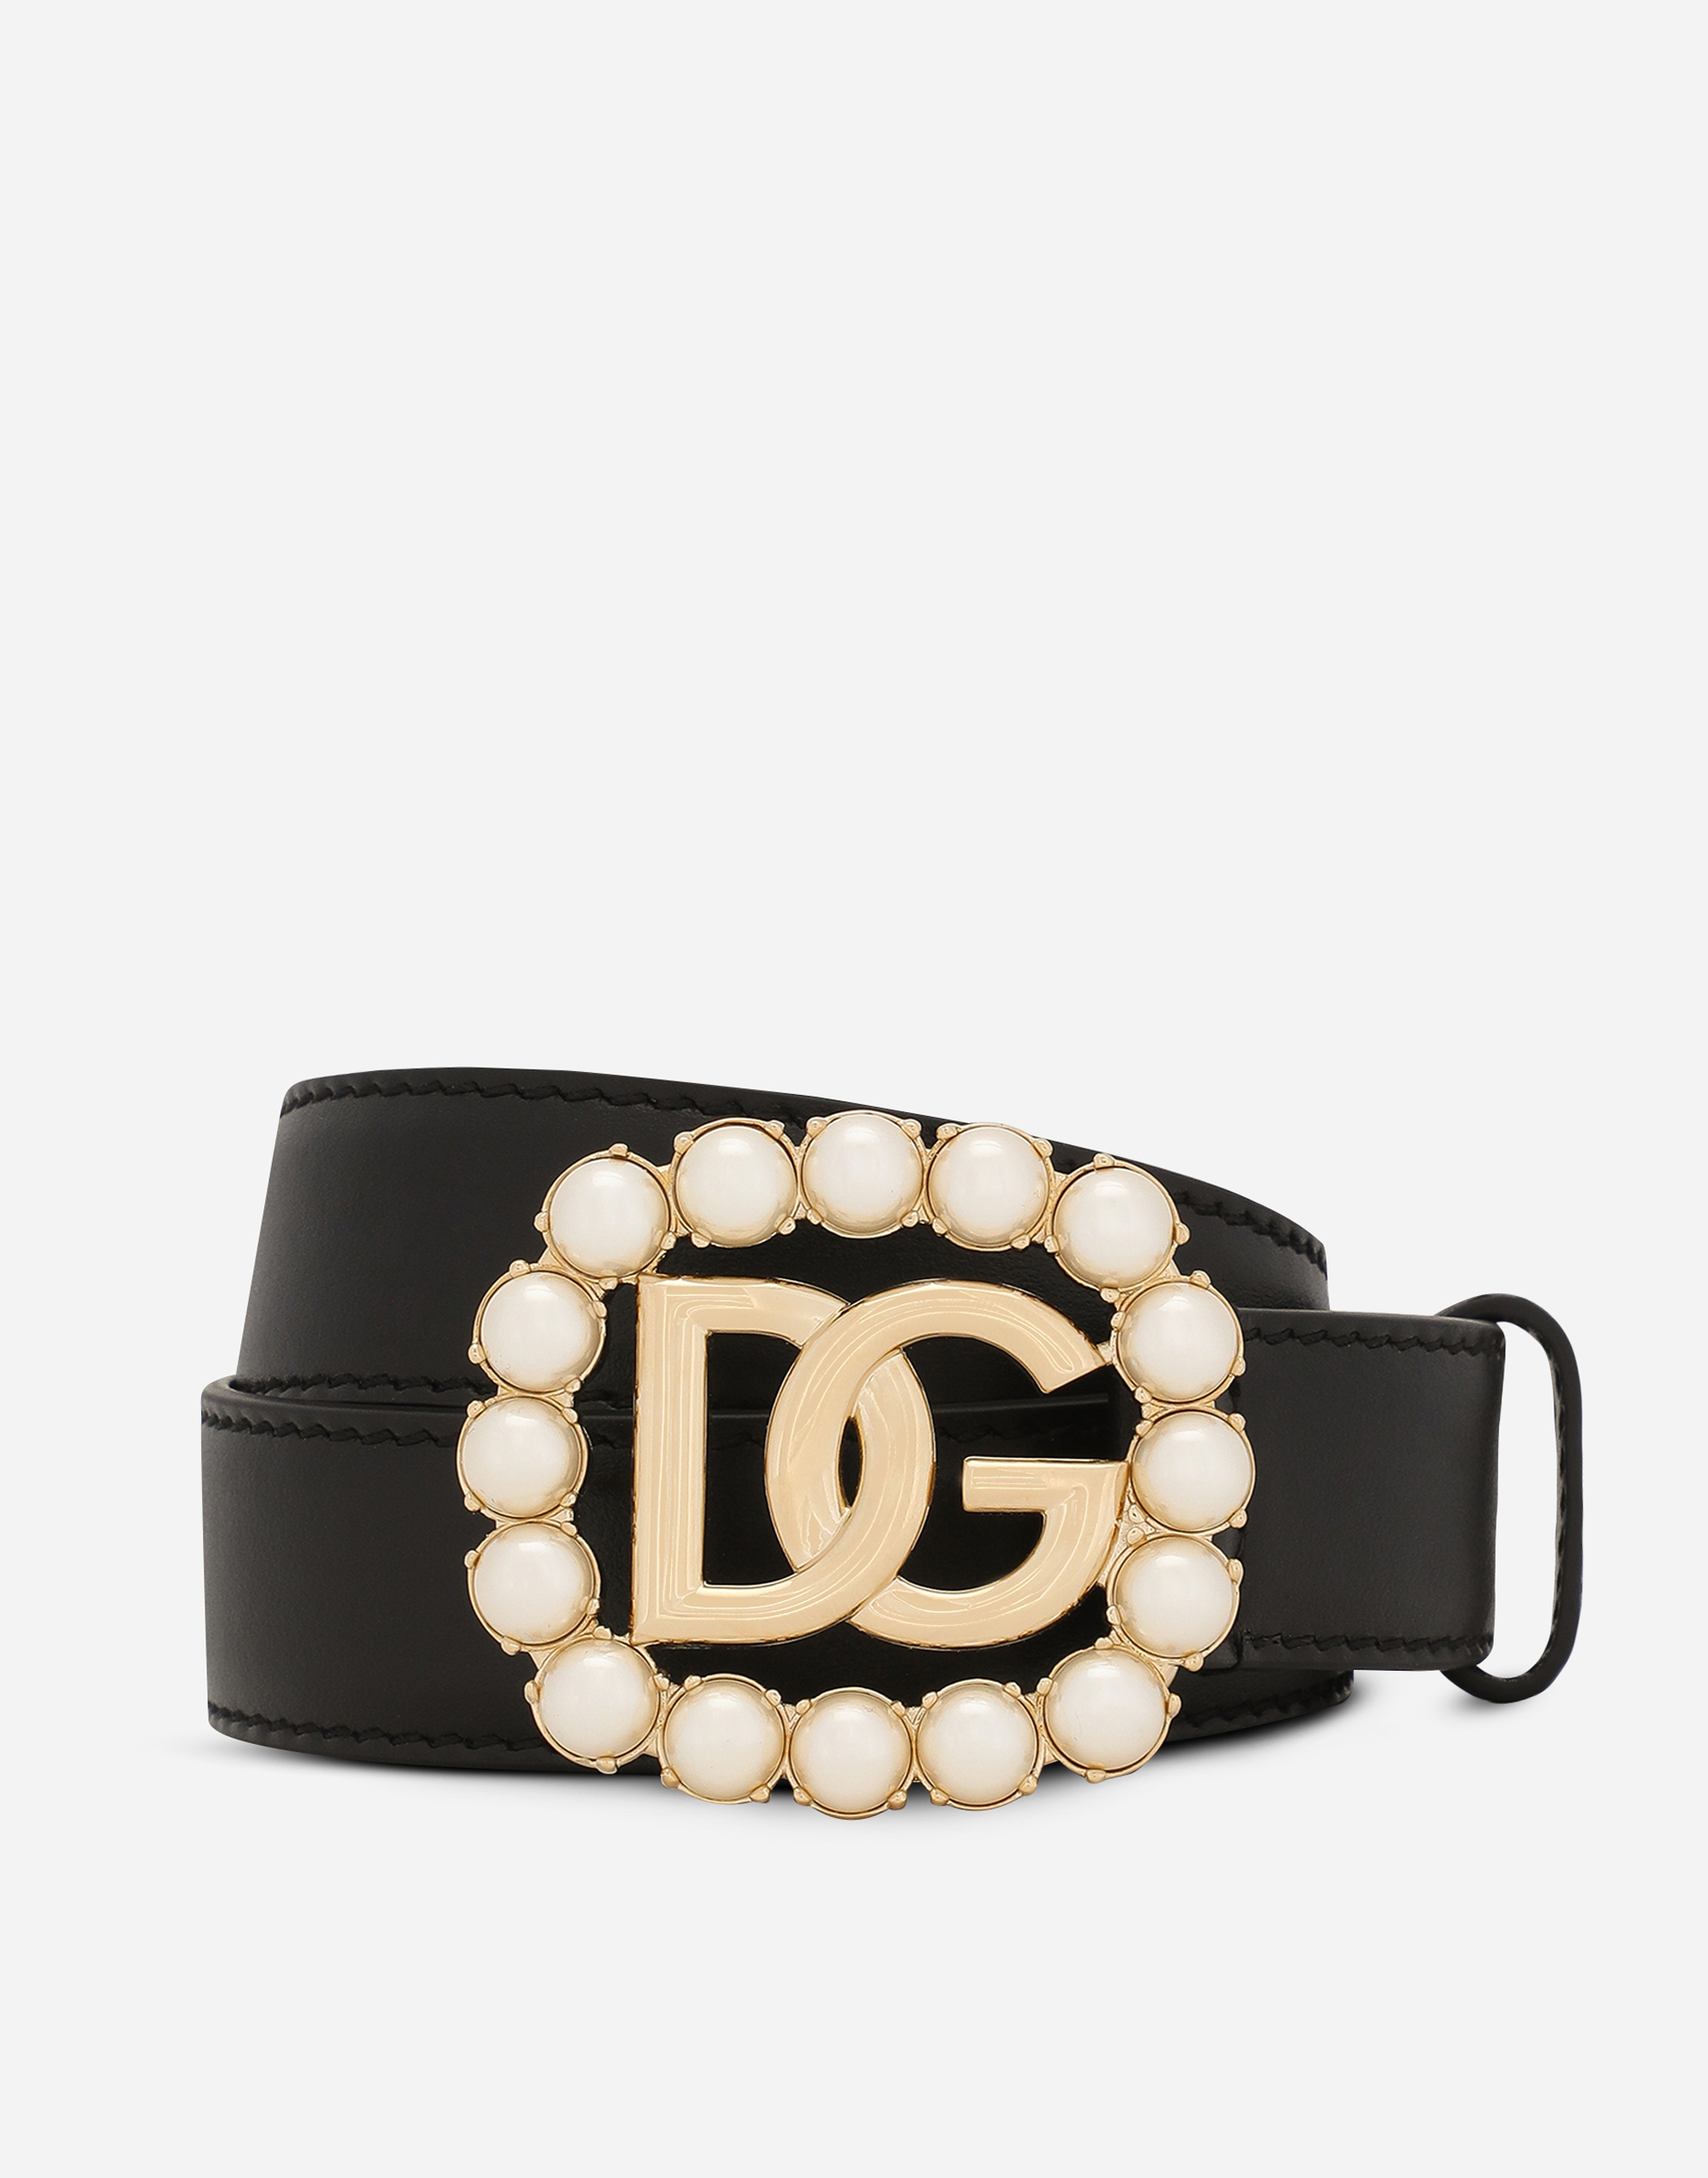 Calfskin belt with DG logo with pearls in Black